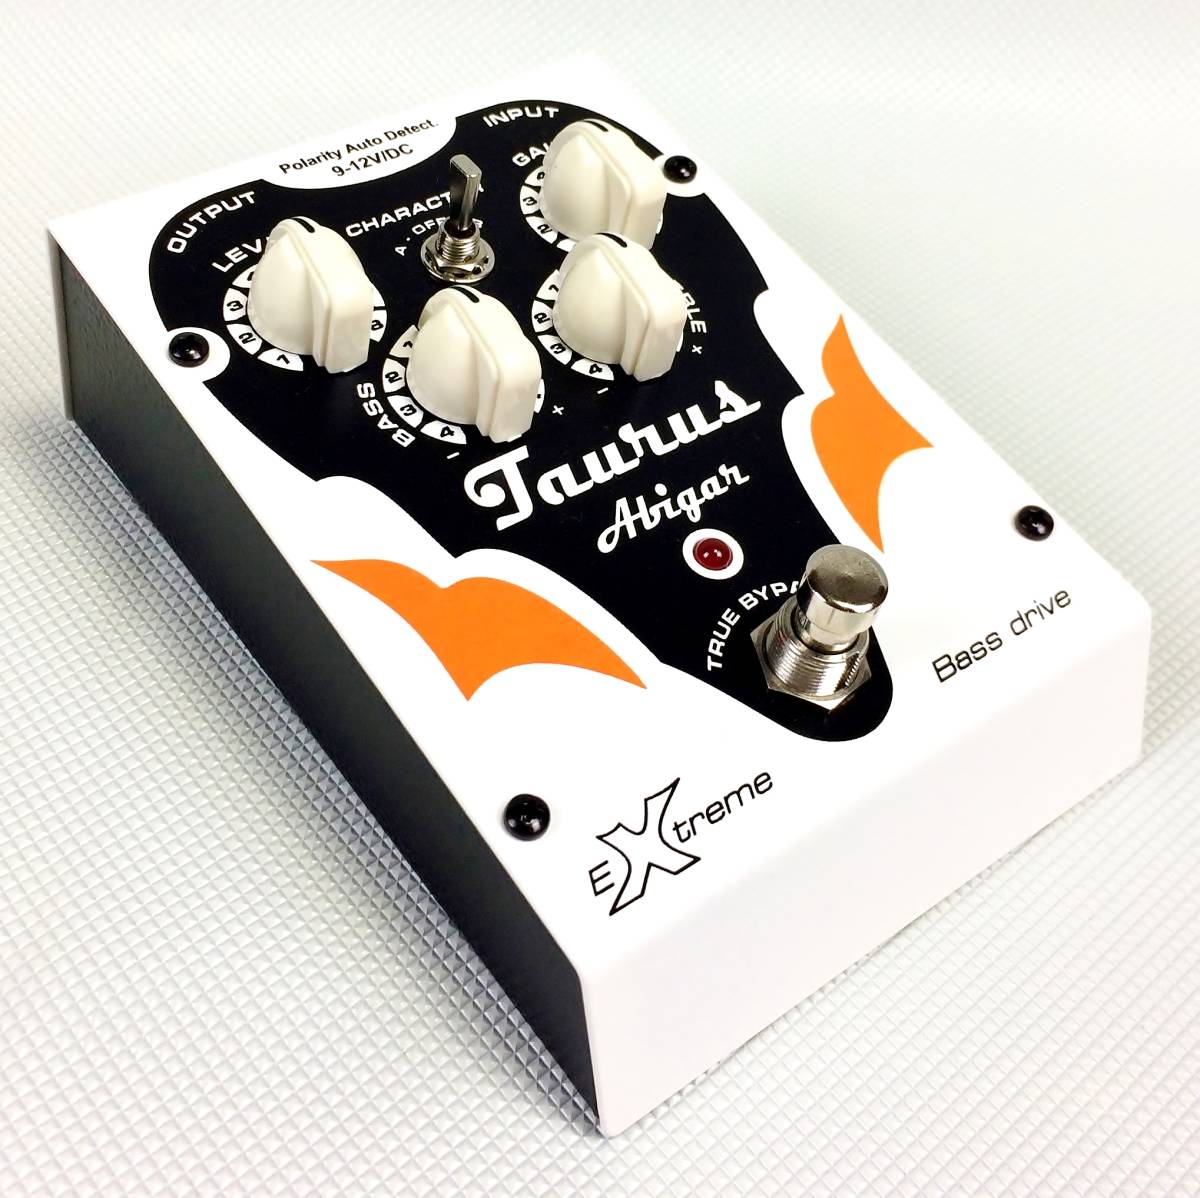 Taurus Abigar Extreme MK-2 base for overdrive beautiful goods Made in Poland domestic regular imported goods tu Roo bypass circuit taulas Poland made 